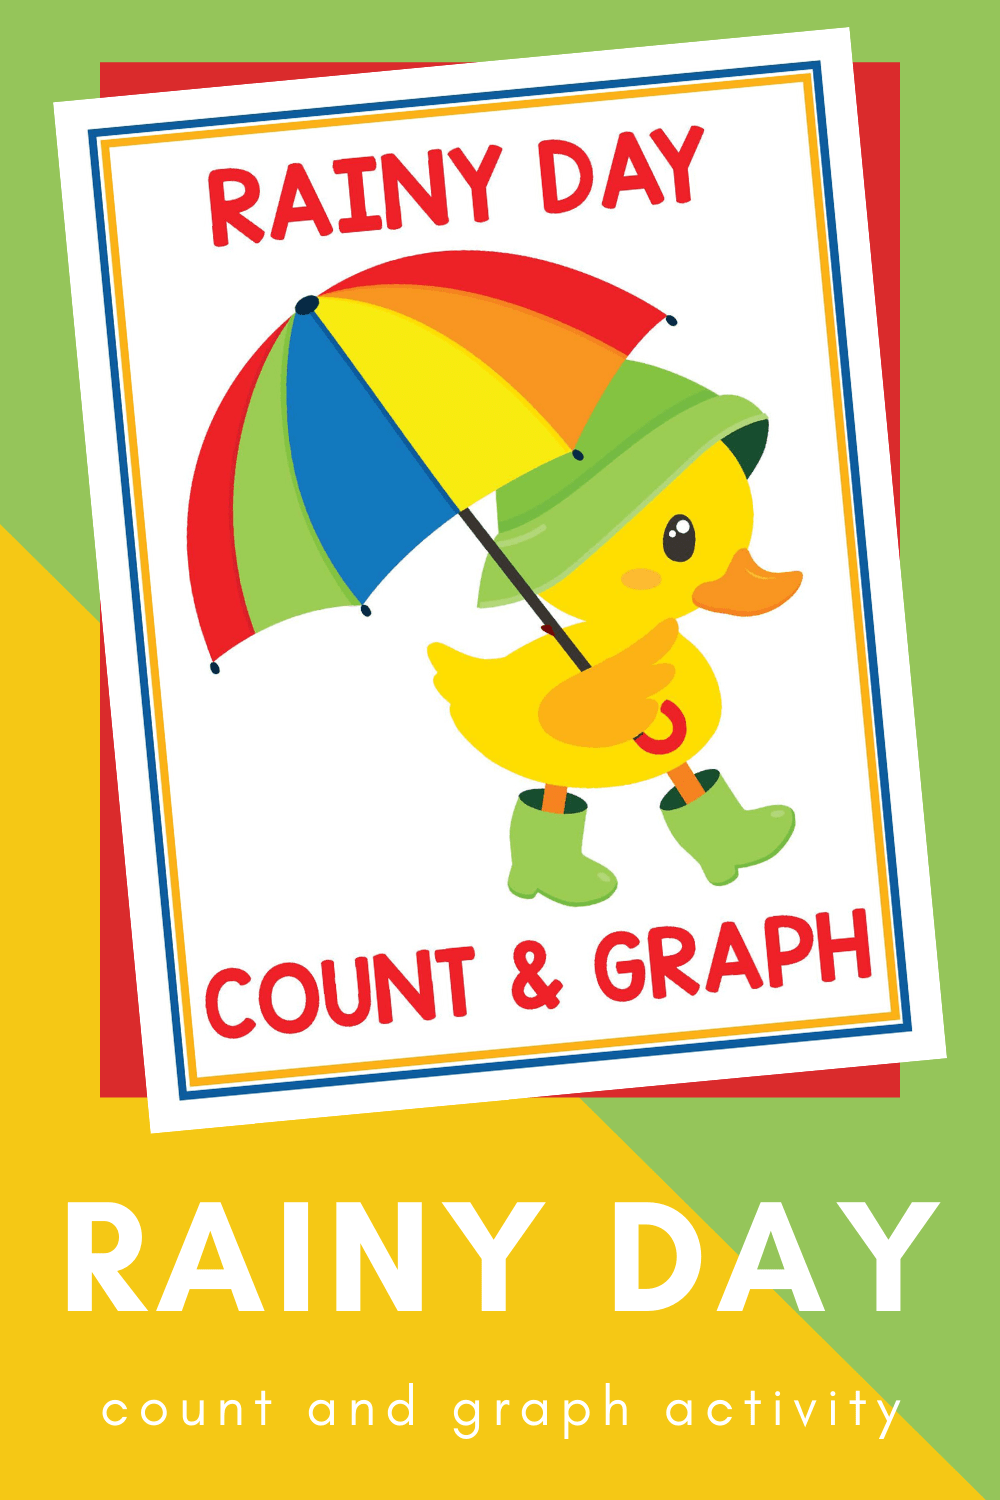 Be sure to add these fun rainy day count and graph worksheets to your preschool activities! They're perfect for spring and summer days.